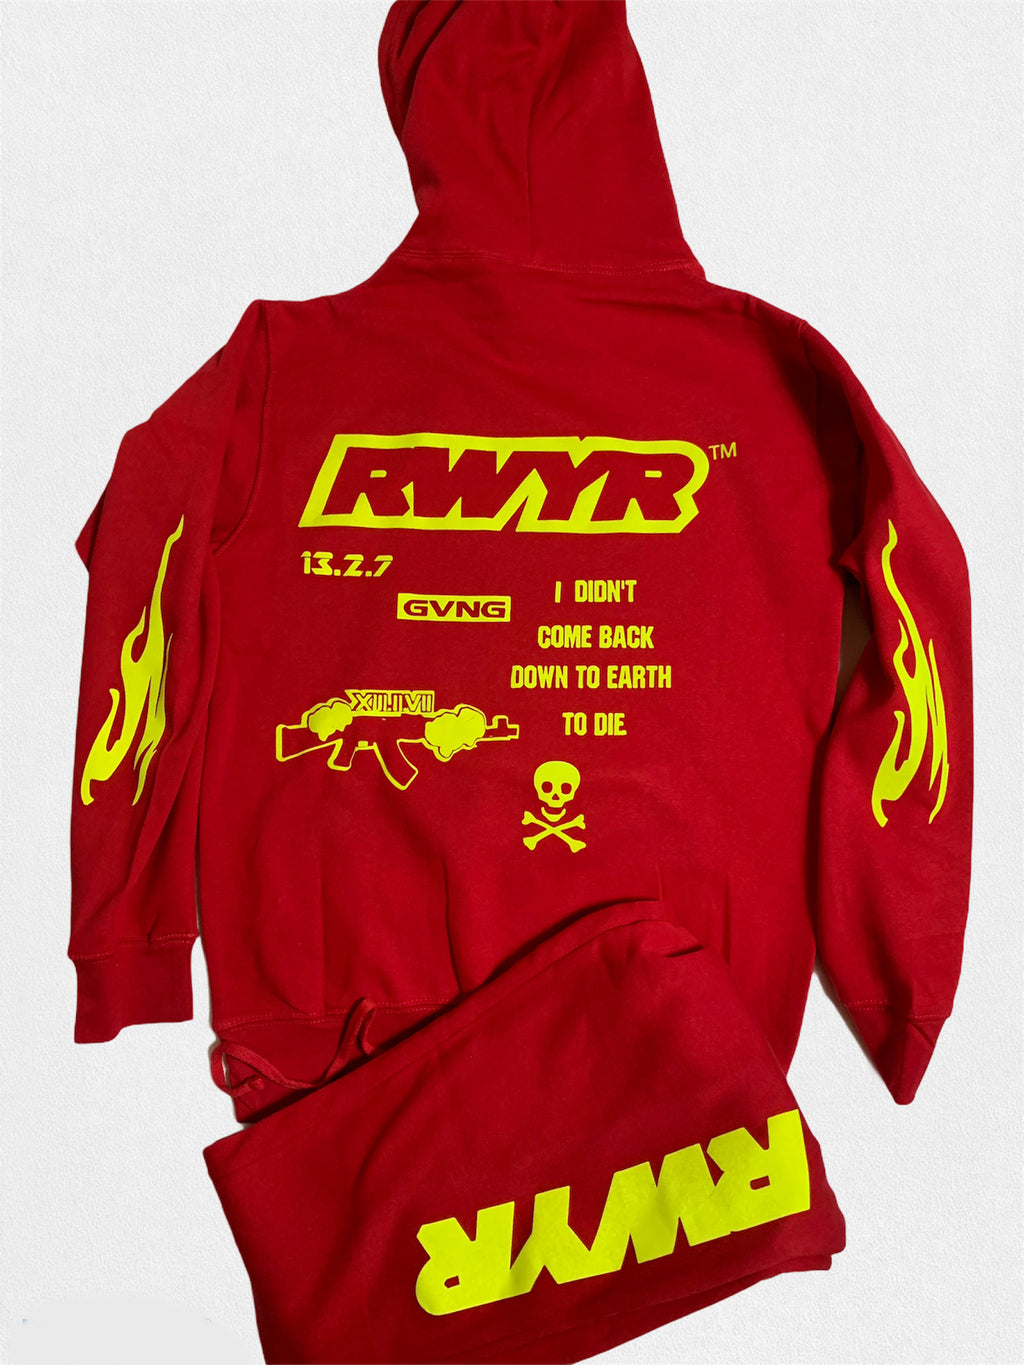 RWYR Red/yellow suitsuit